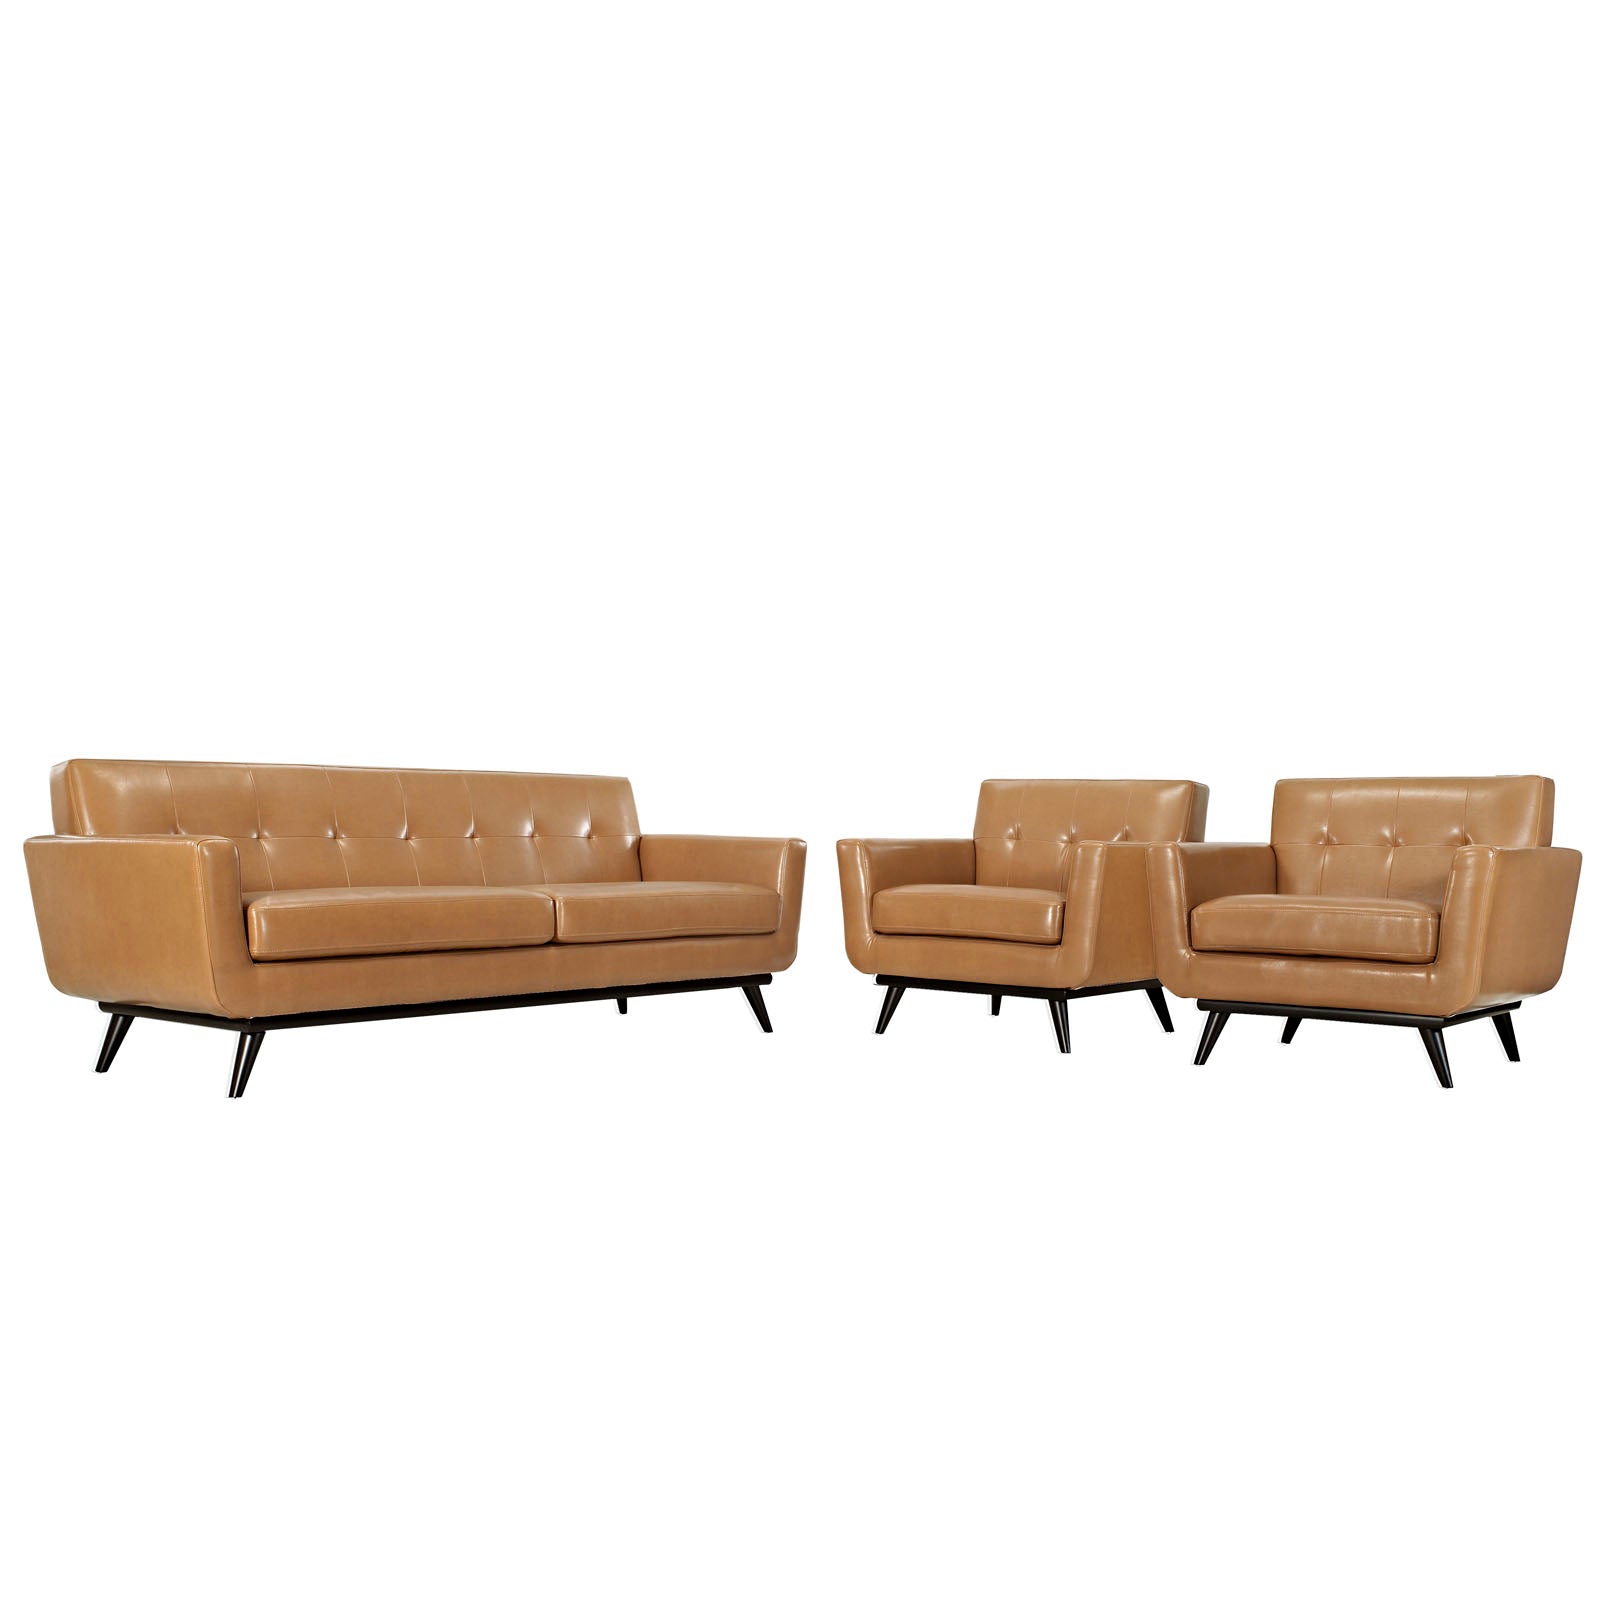 Modway Living Room Sets - Engage 3 Piece Leather Living Room Set Tan